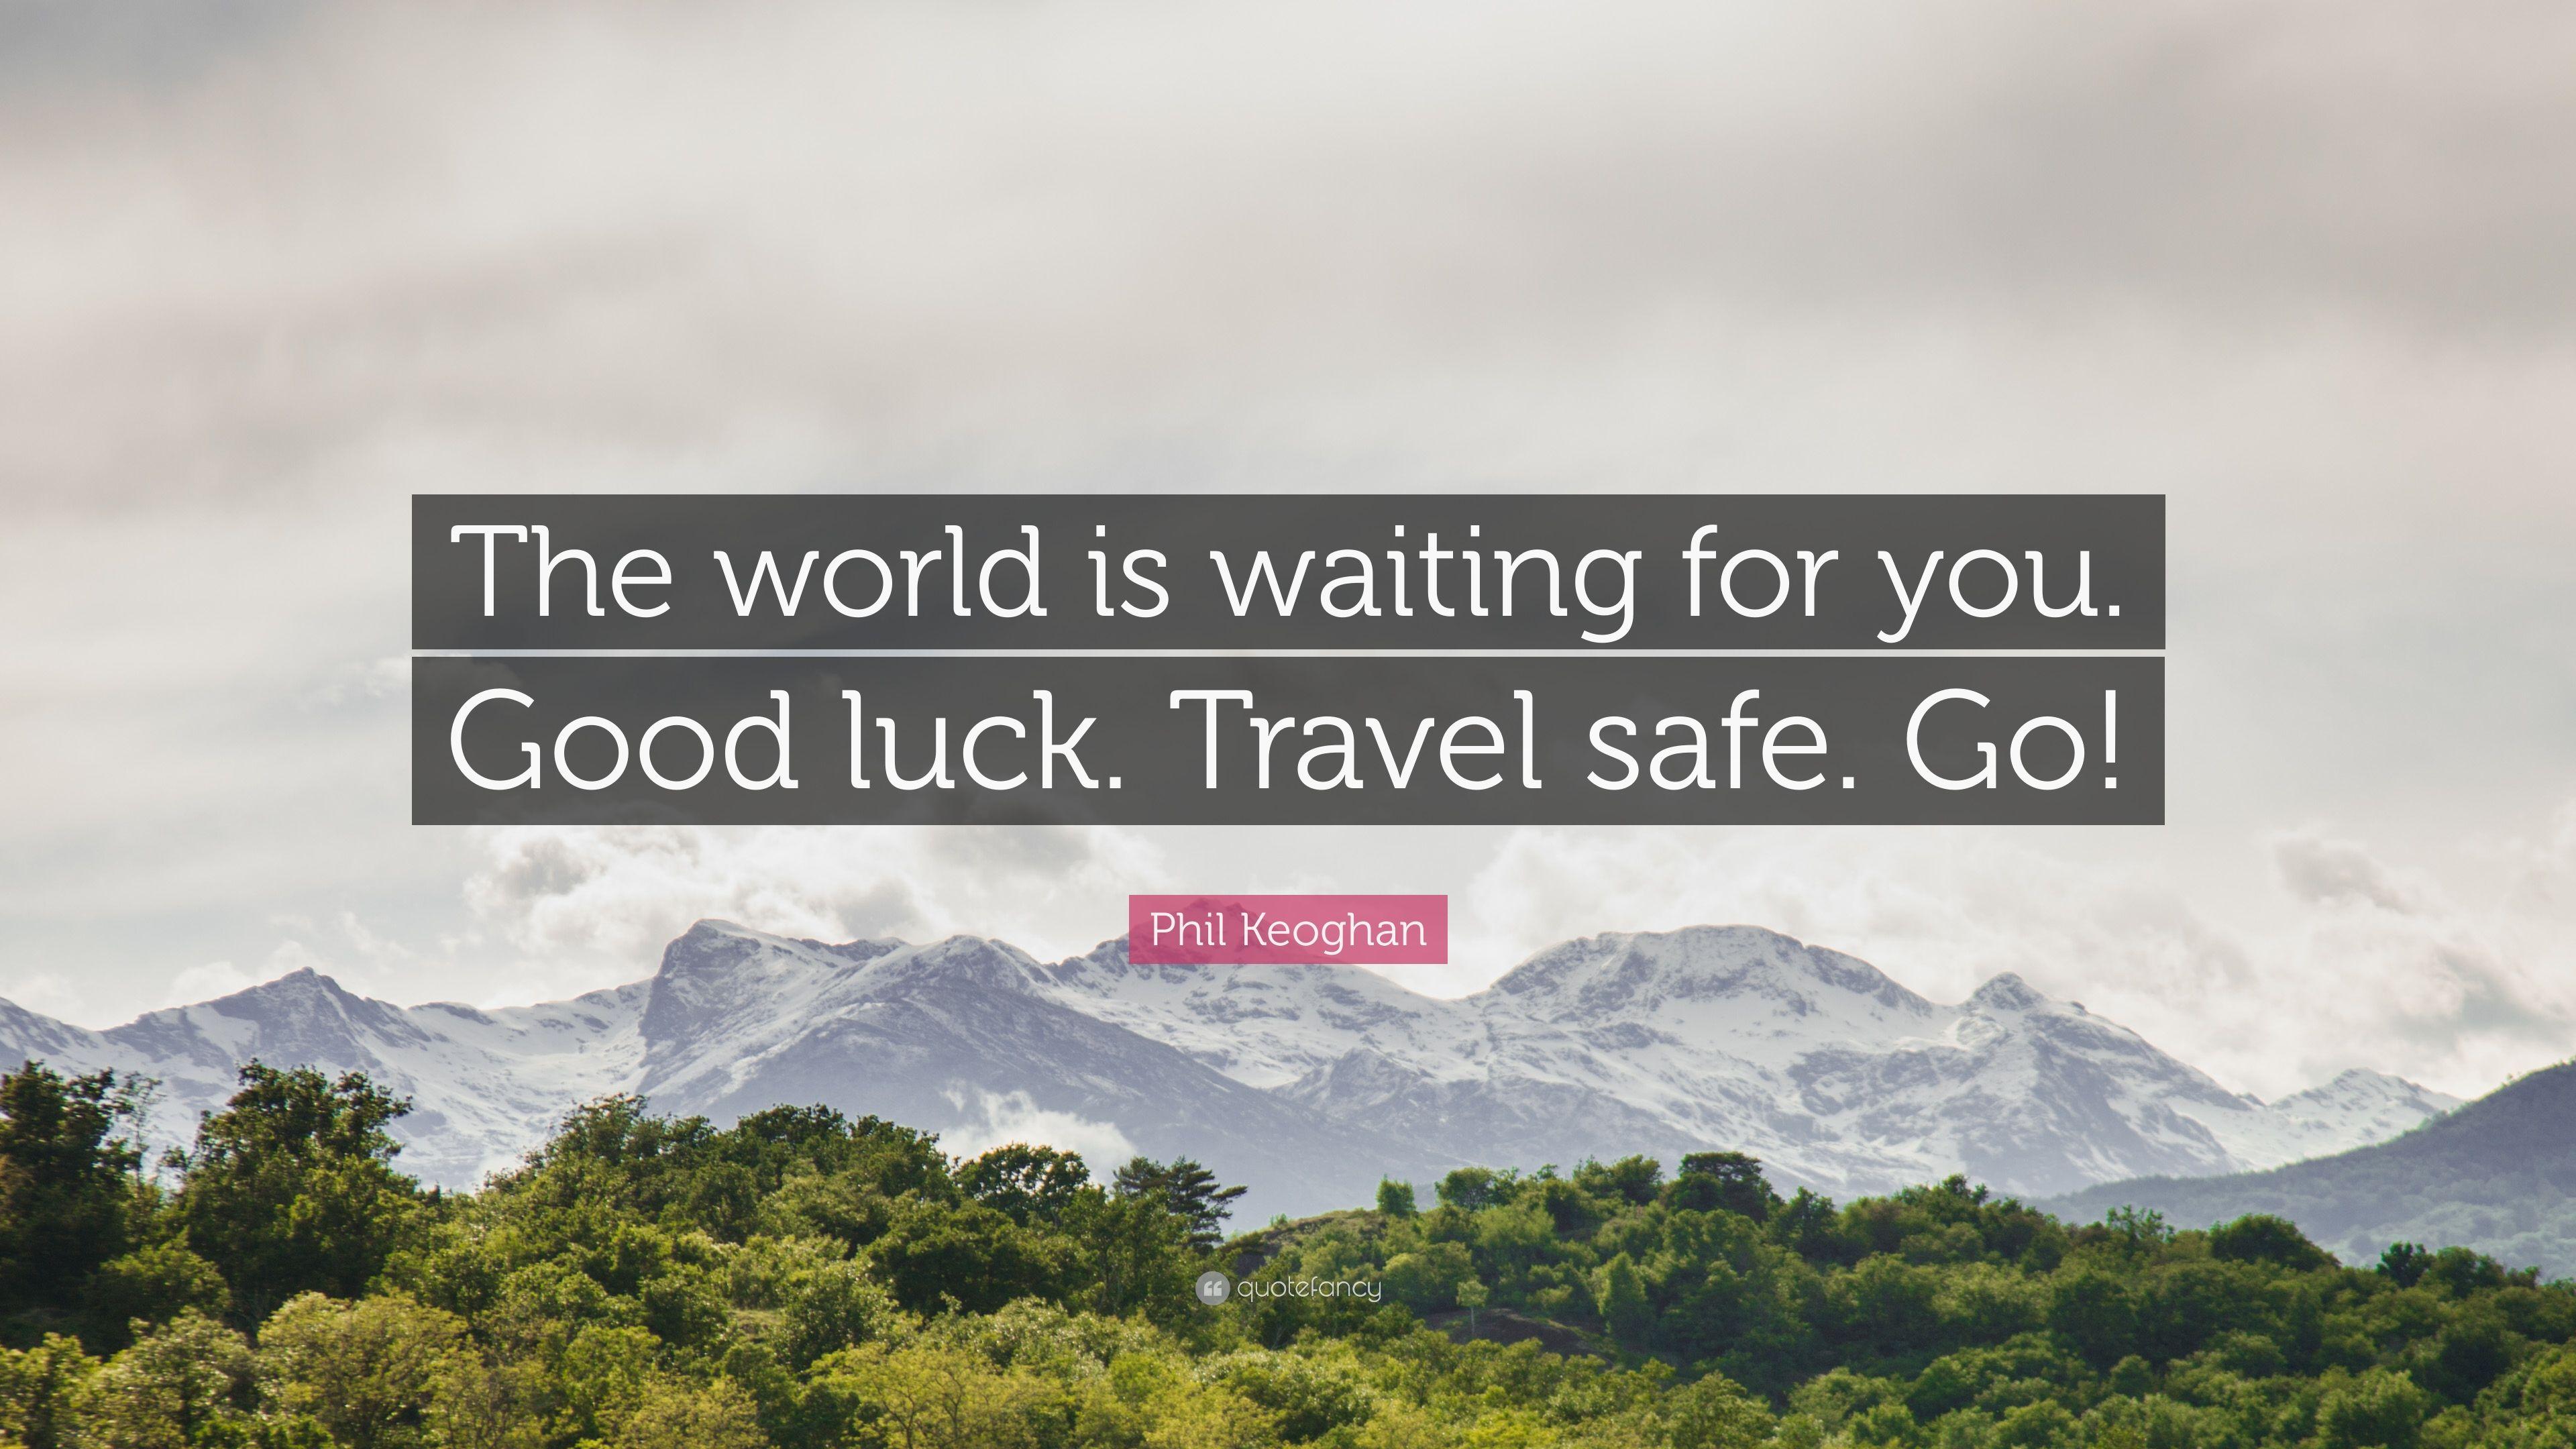 Phil Keoghan Quote: “The world is waiting for you. Good luck. Travel